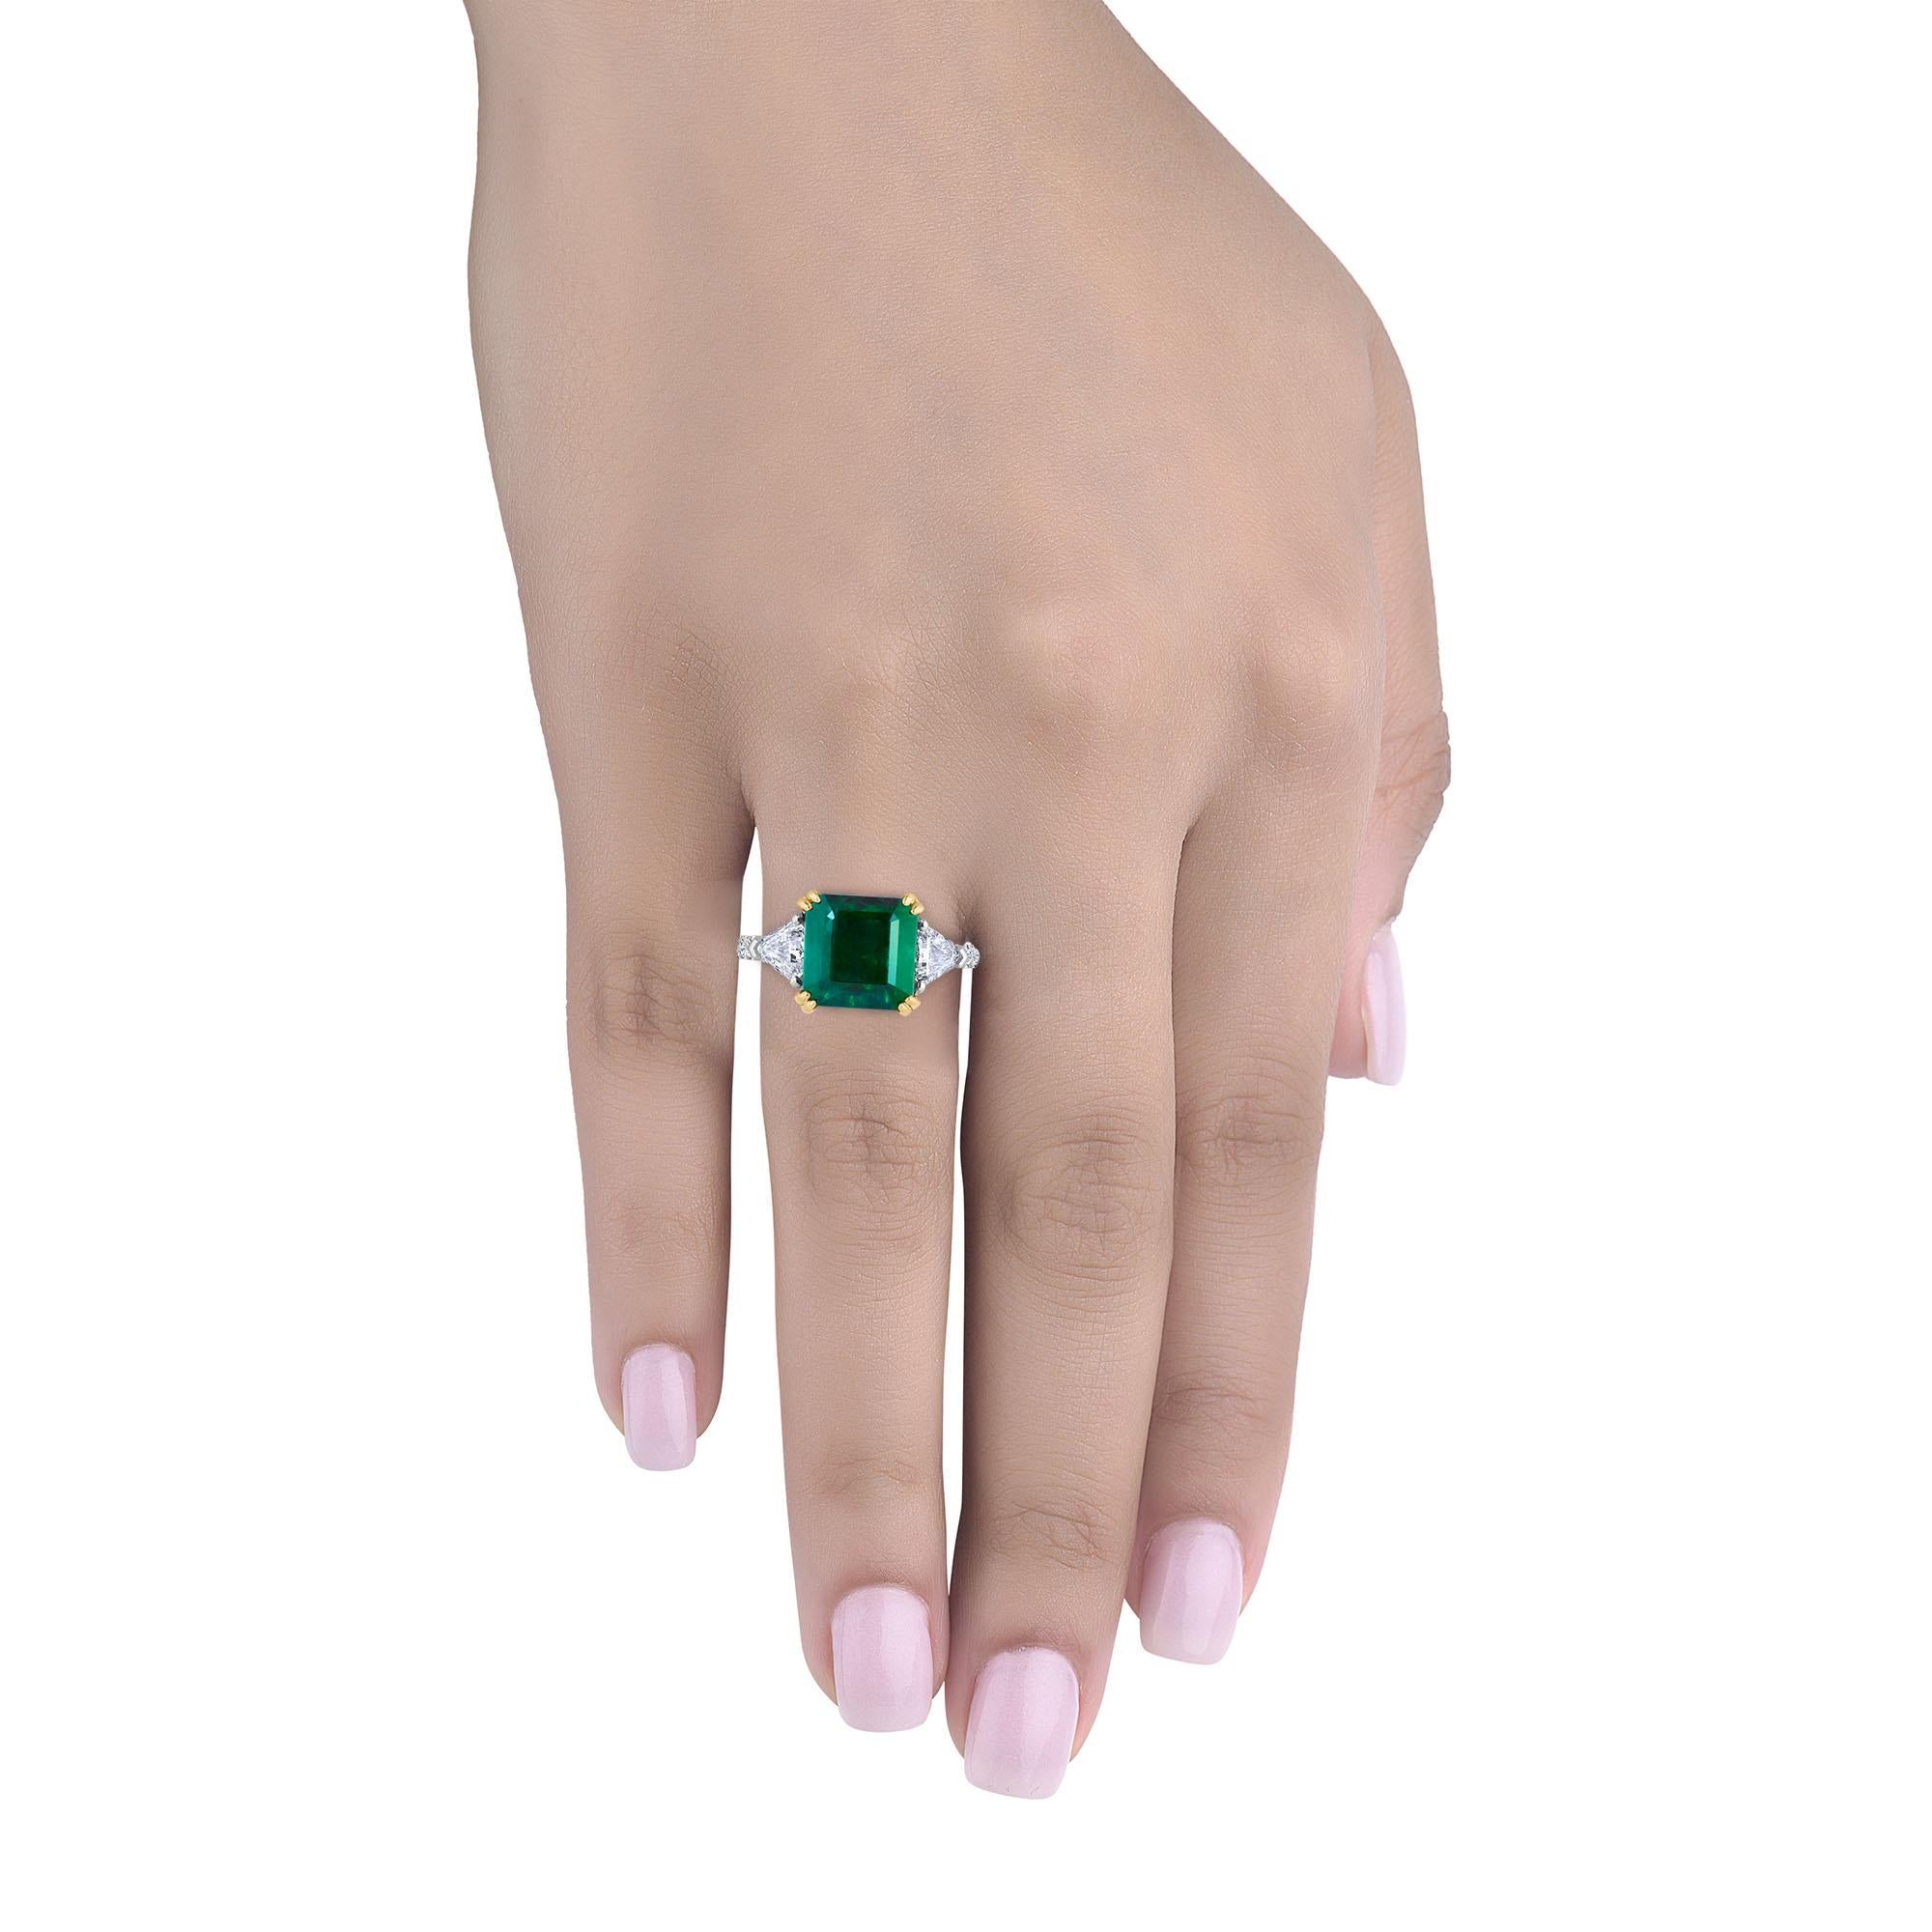 Hand made in the Emilio Jewelry Factory, A gorgeous deep green Cushion Zambian Emerald 4.32 Carats set in the center. The emerald is very clean and completely eye clean. 
Approximate Center Emerald Dimensions: 9.22x9.11
The diamonds total ..82ctand